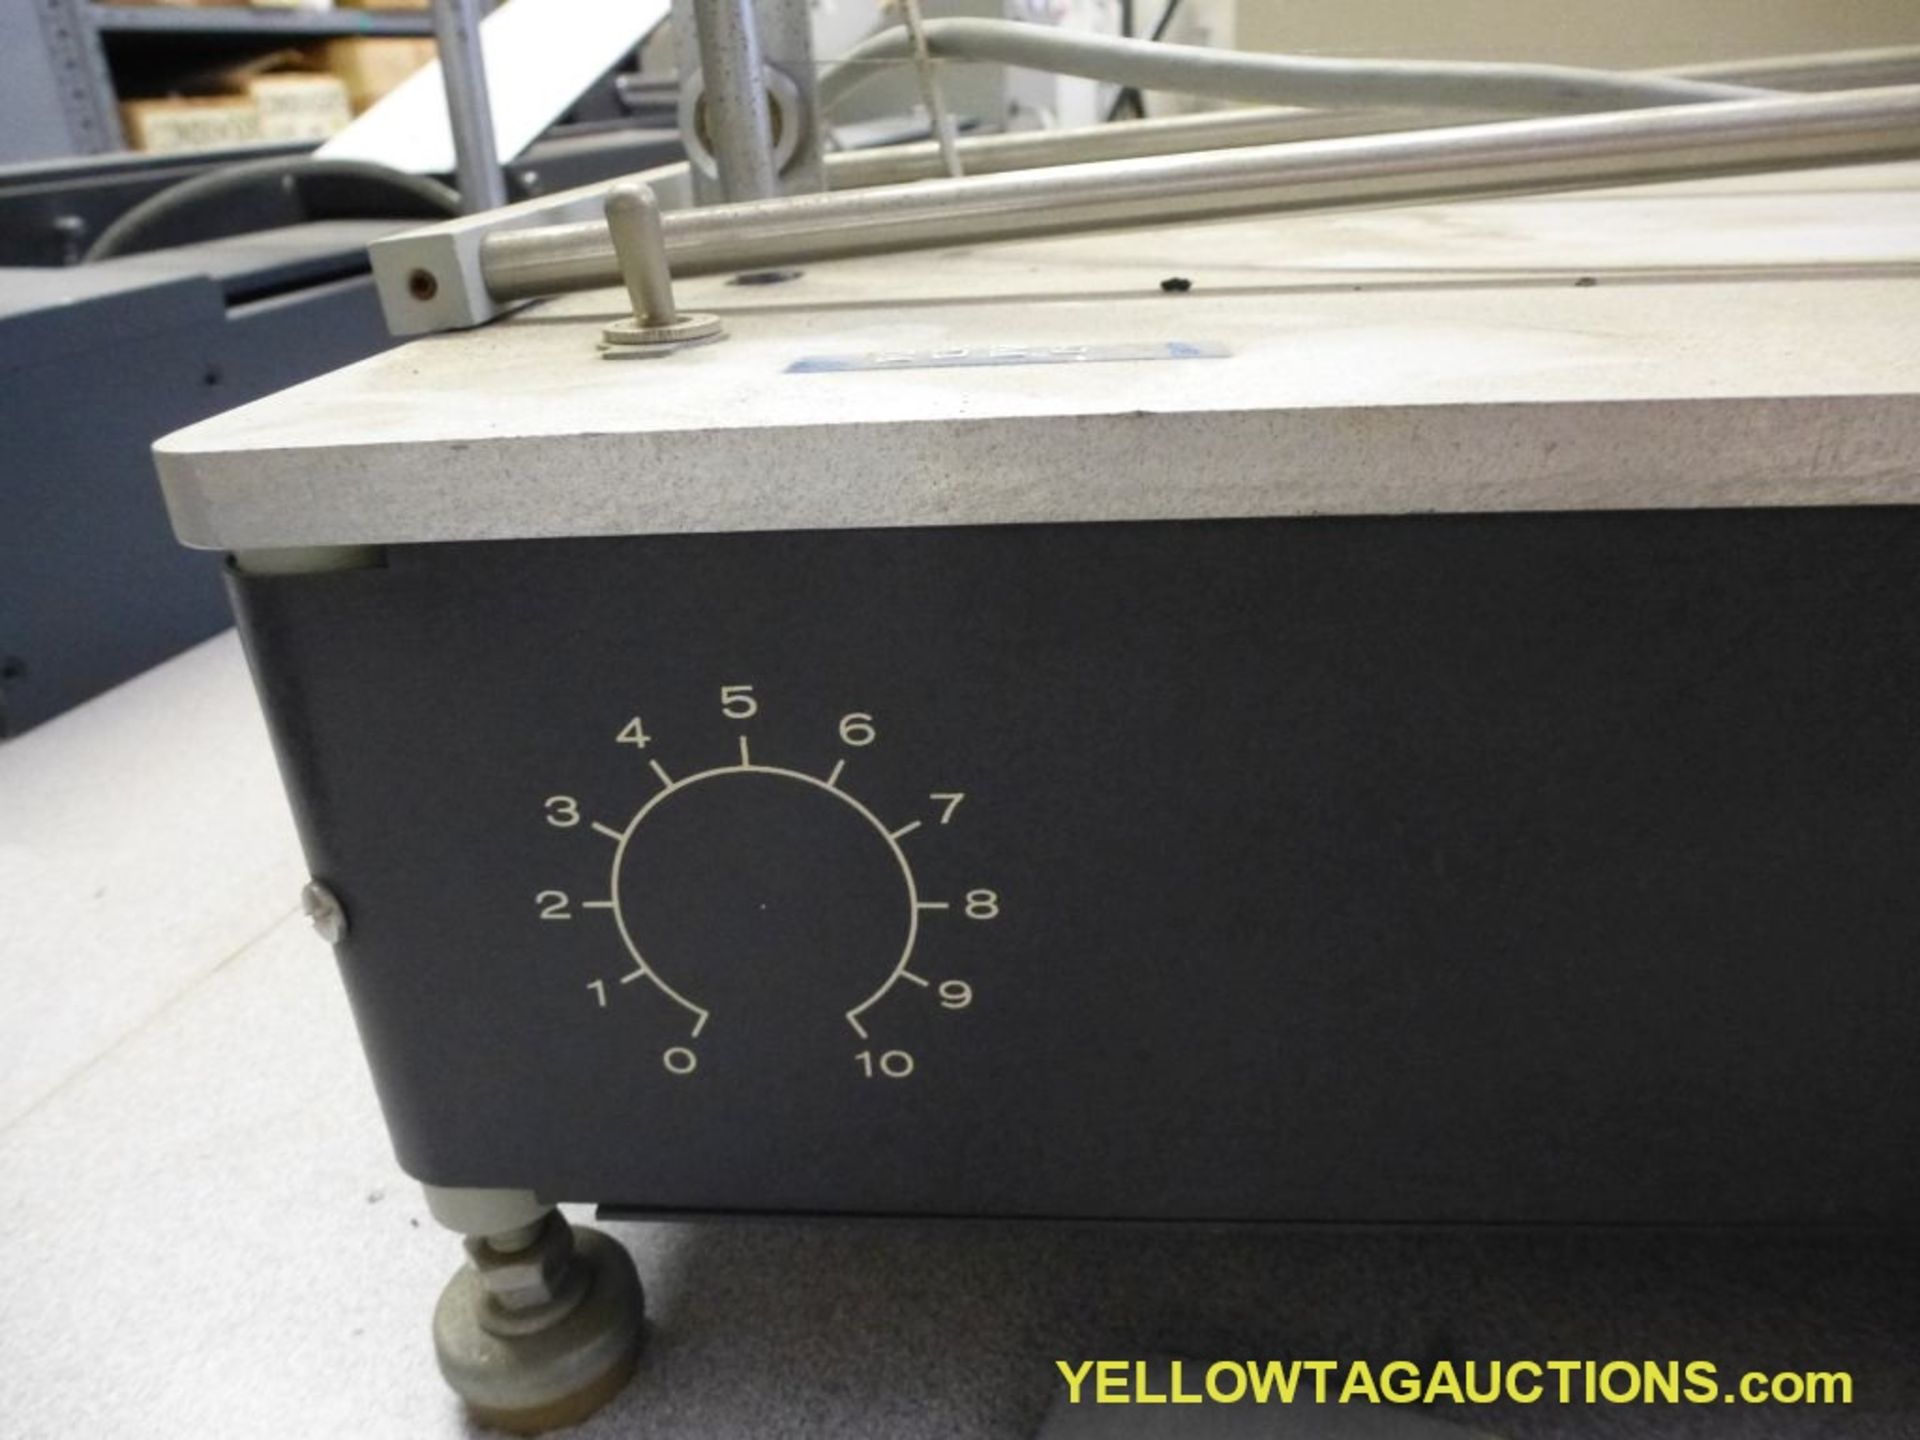 TMI Slip and Friction Tester|115VLocation: Charlotte, NC - Image 2 of 6